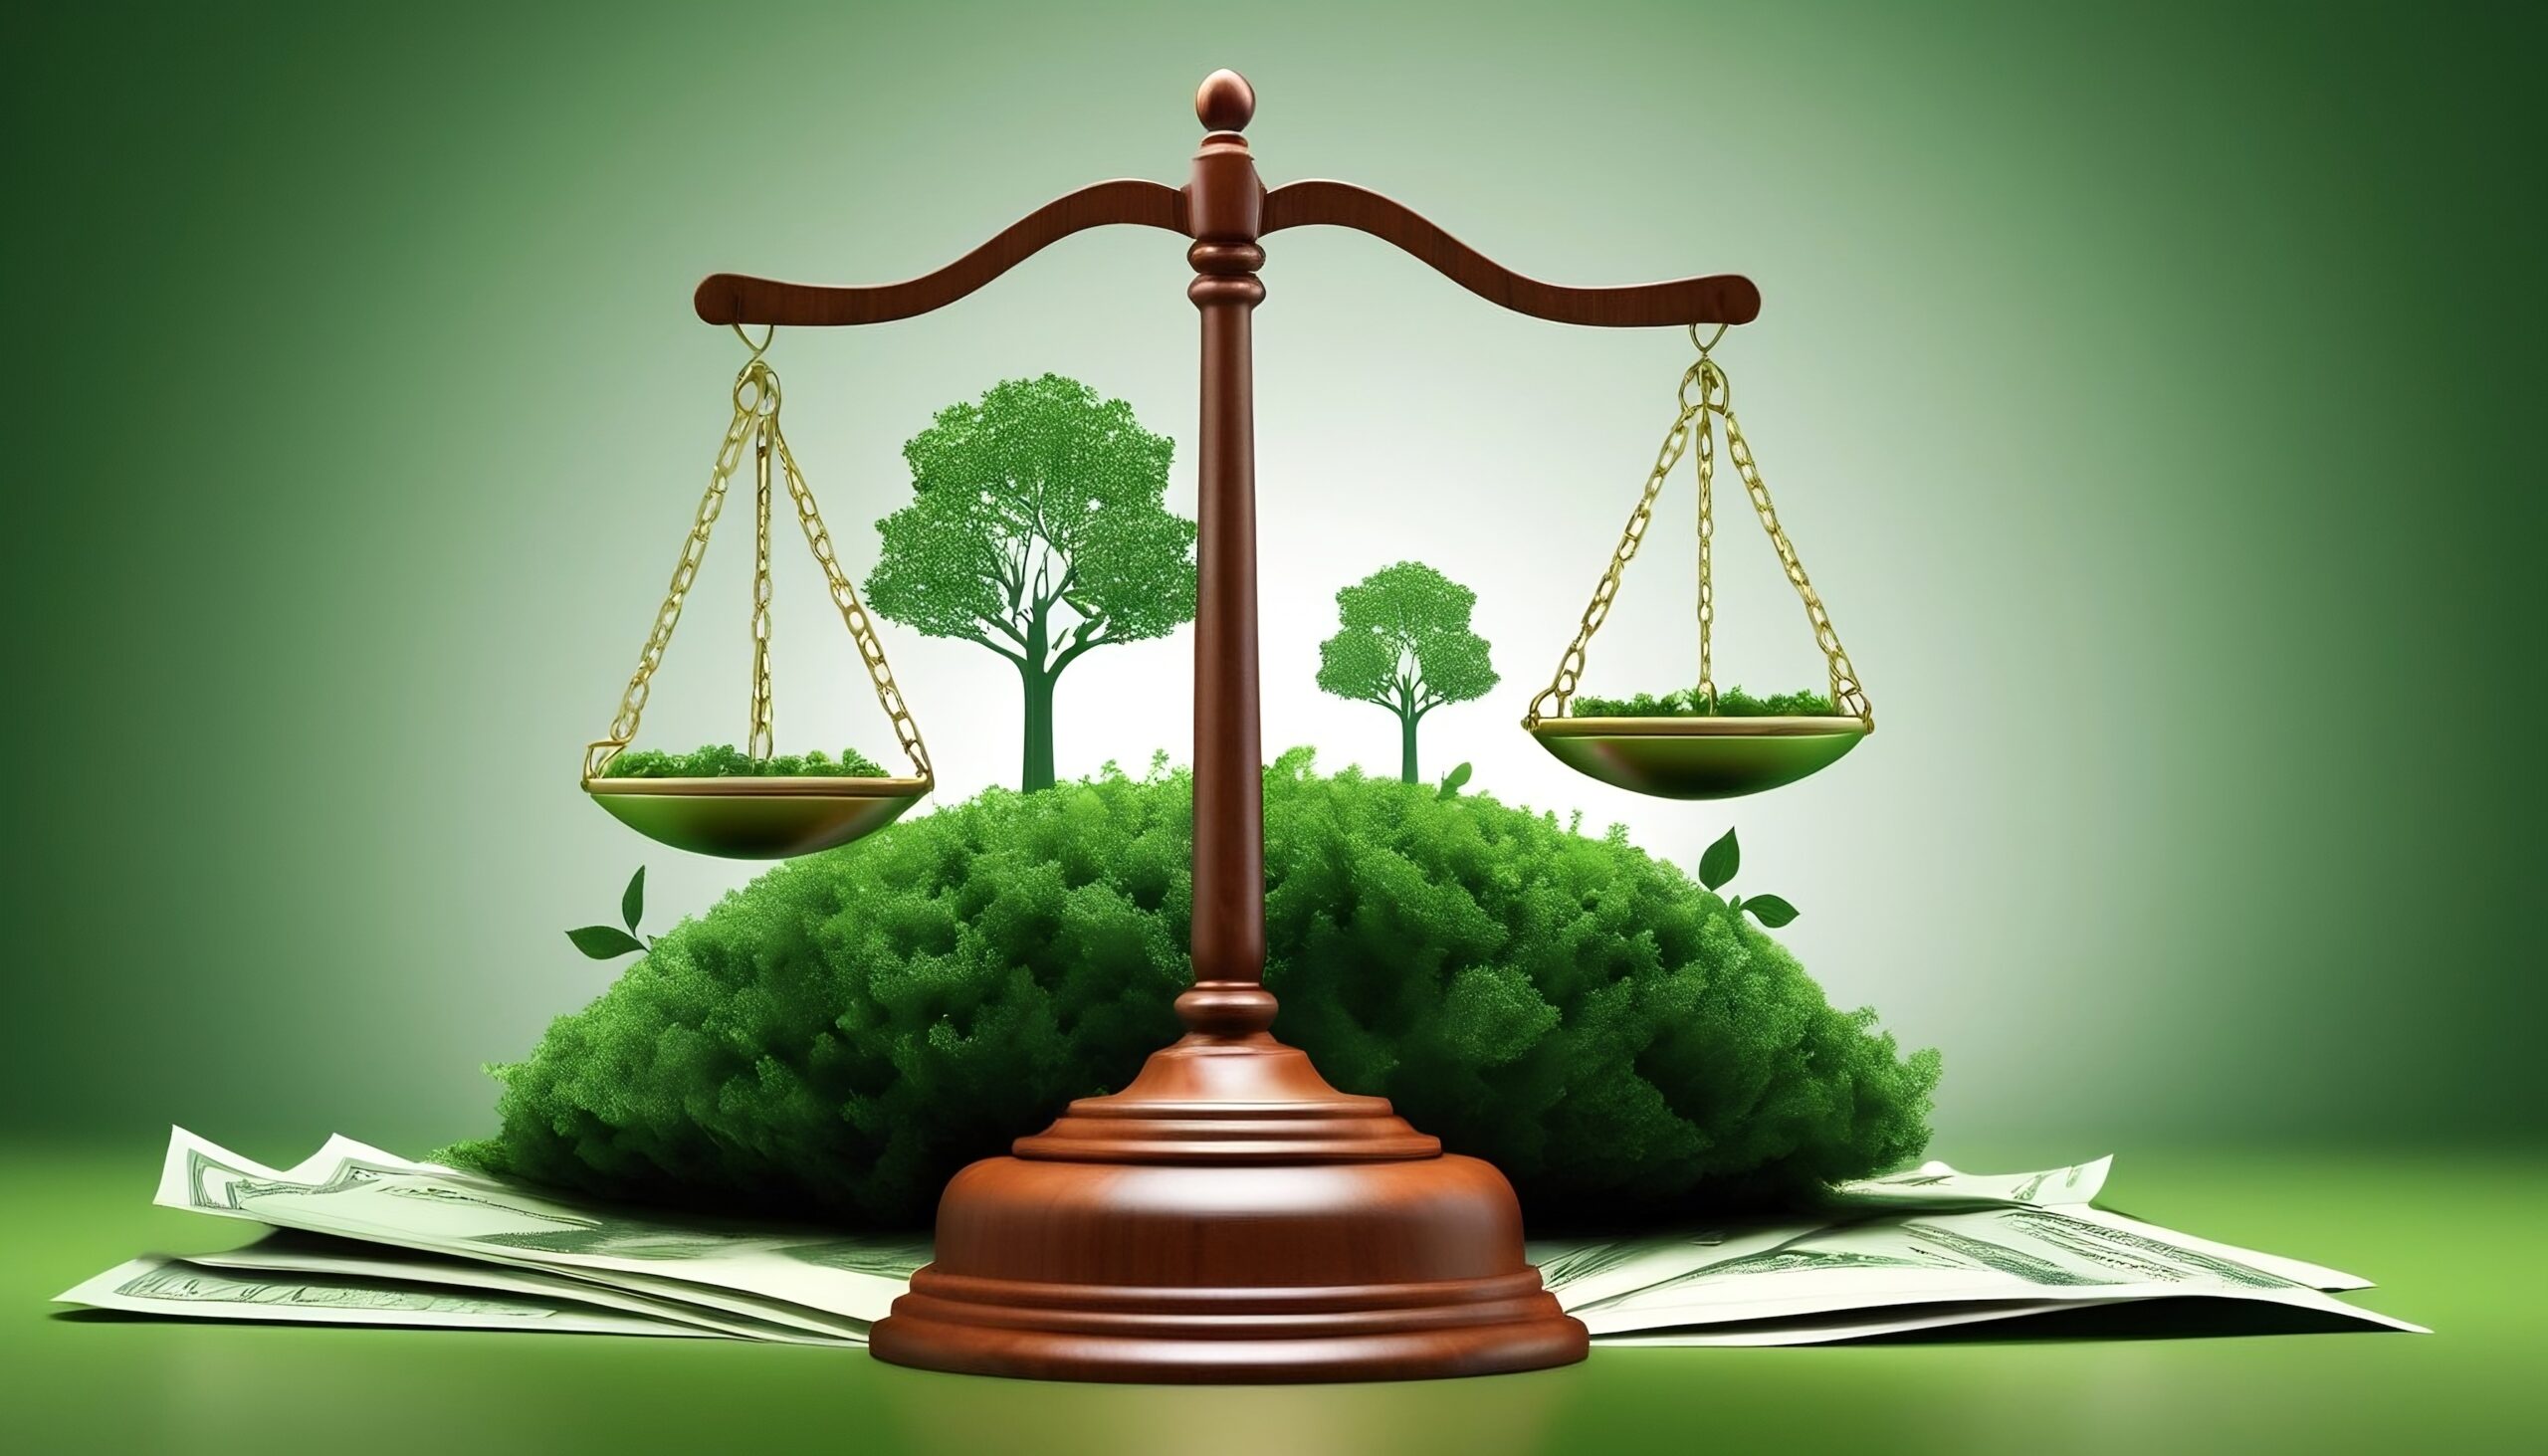 Graphic of scales (representing law) with trees in background sitting on a pile of money